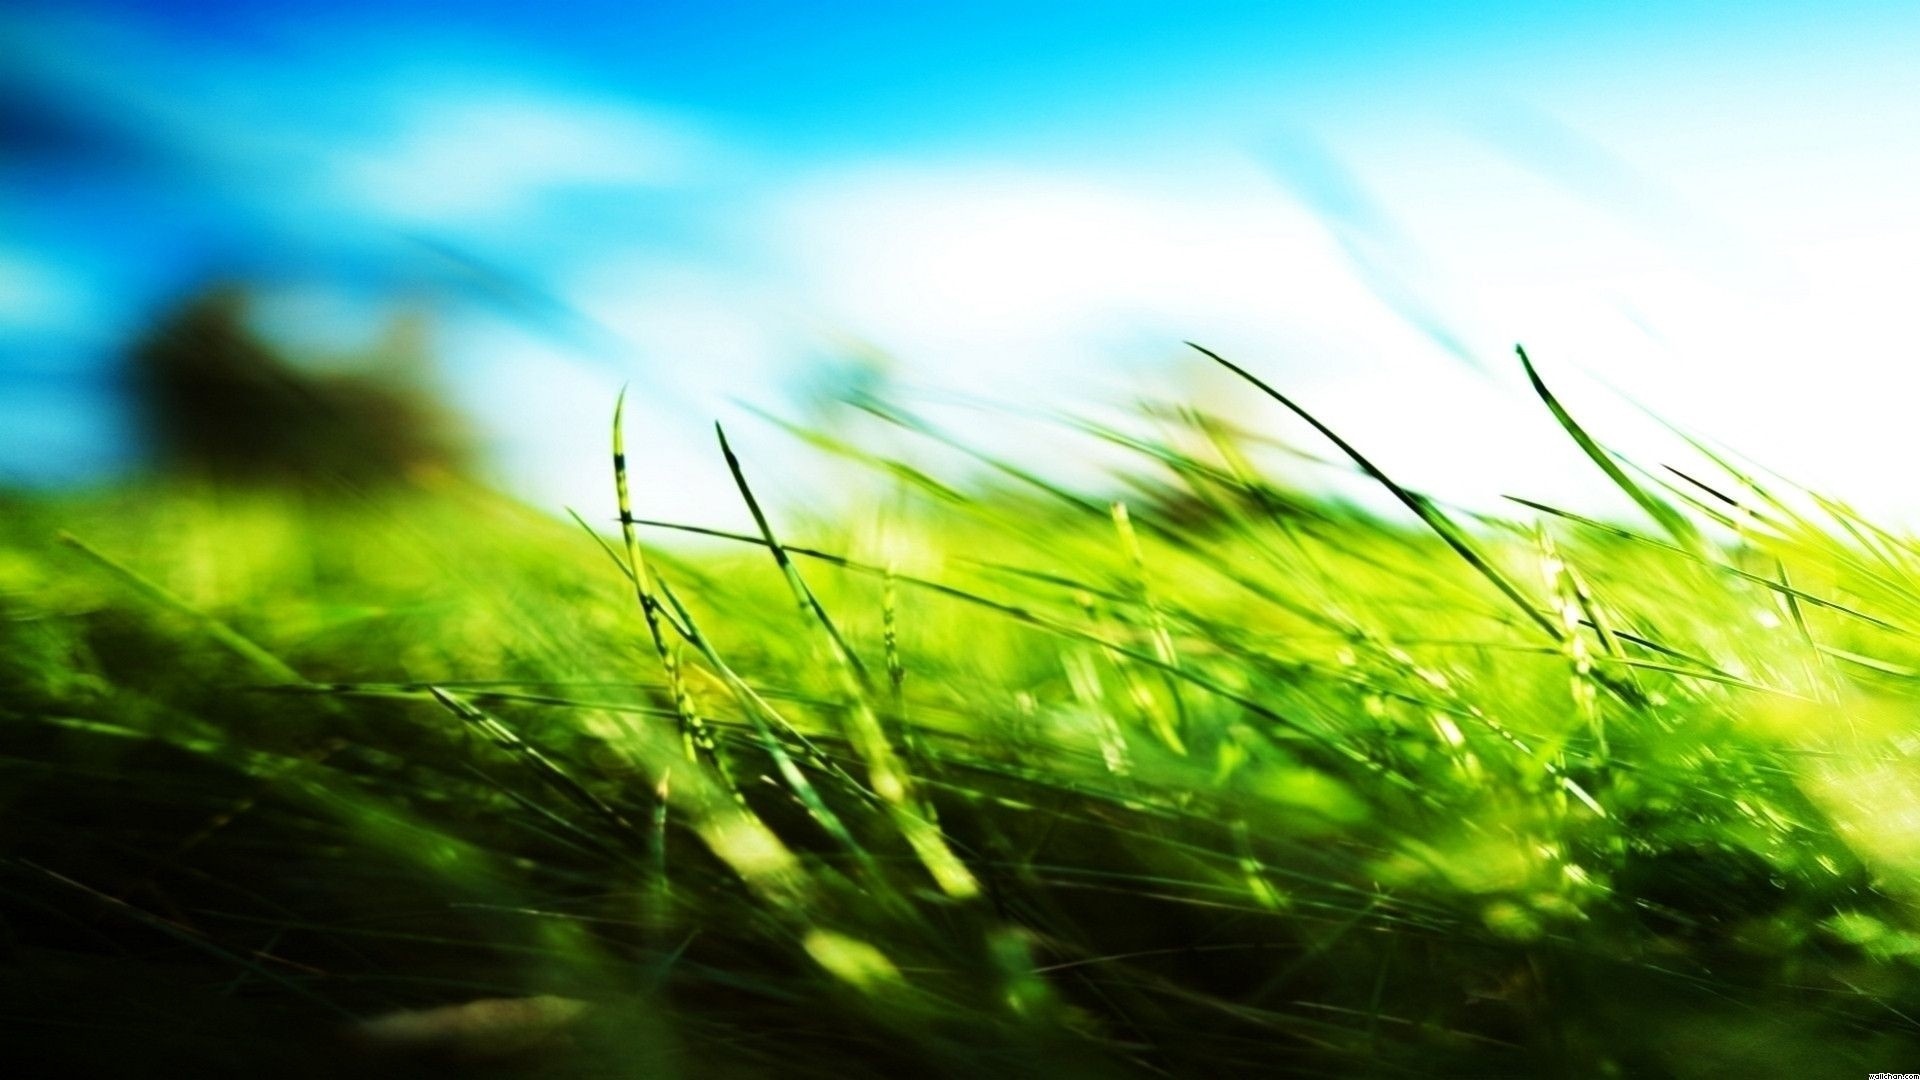 Sky And Grass Wallpaper theme